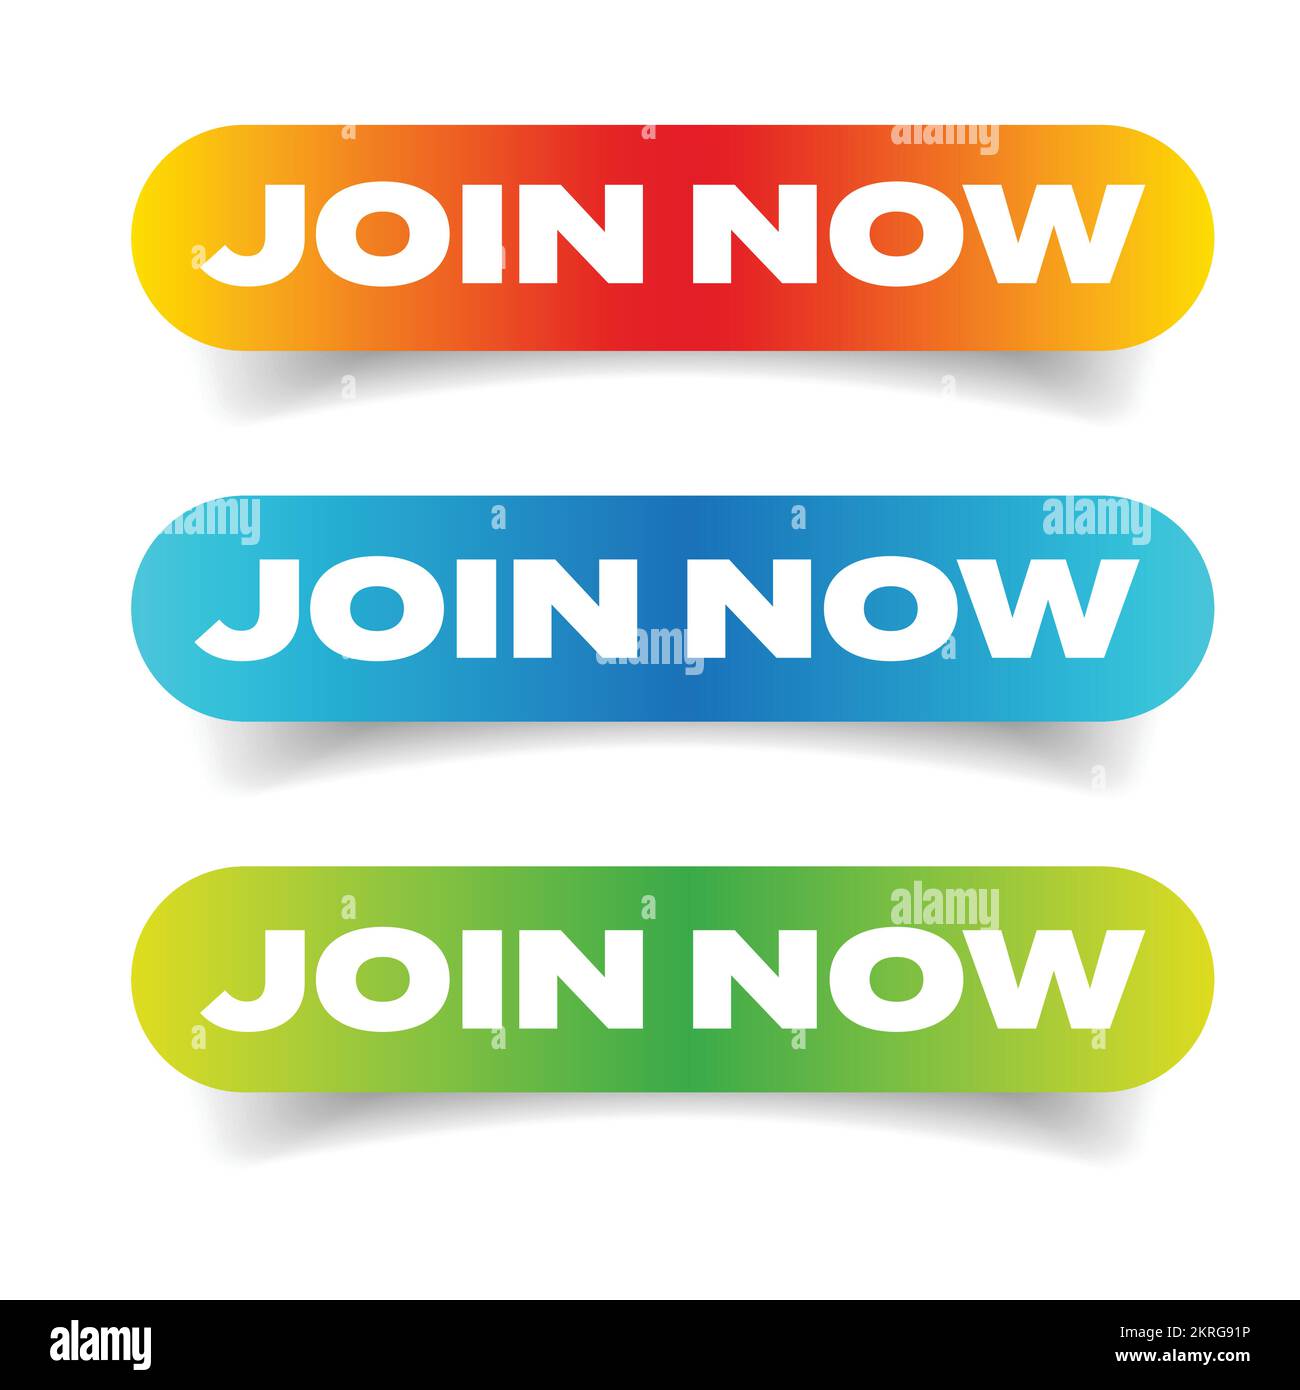 Join now call to action button set Stock Vector